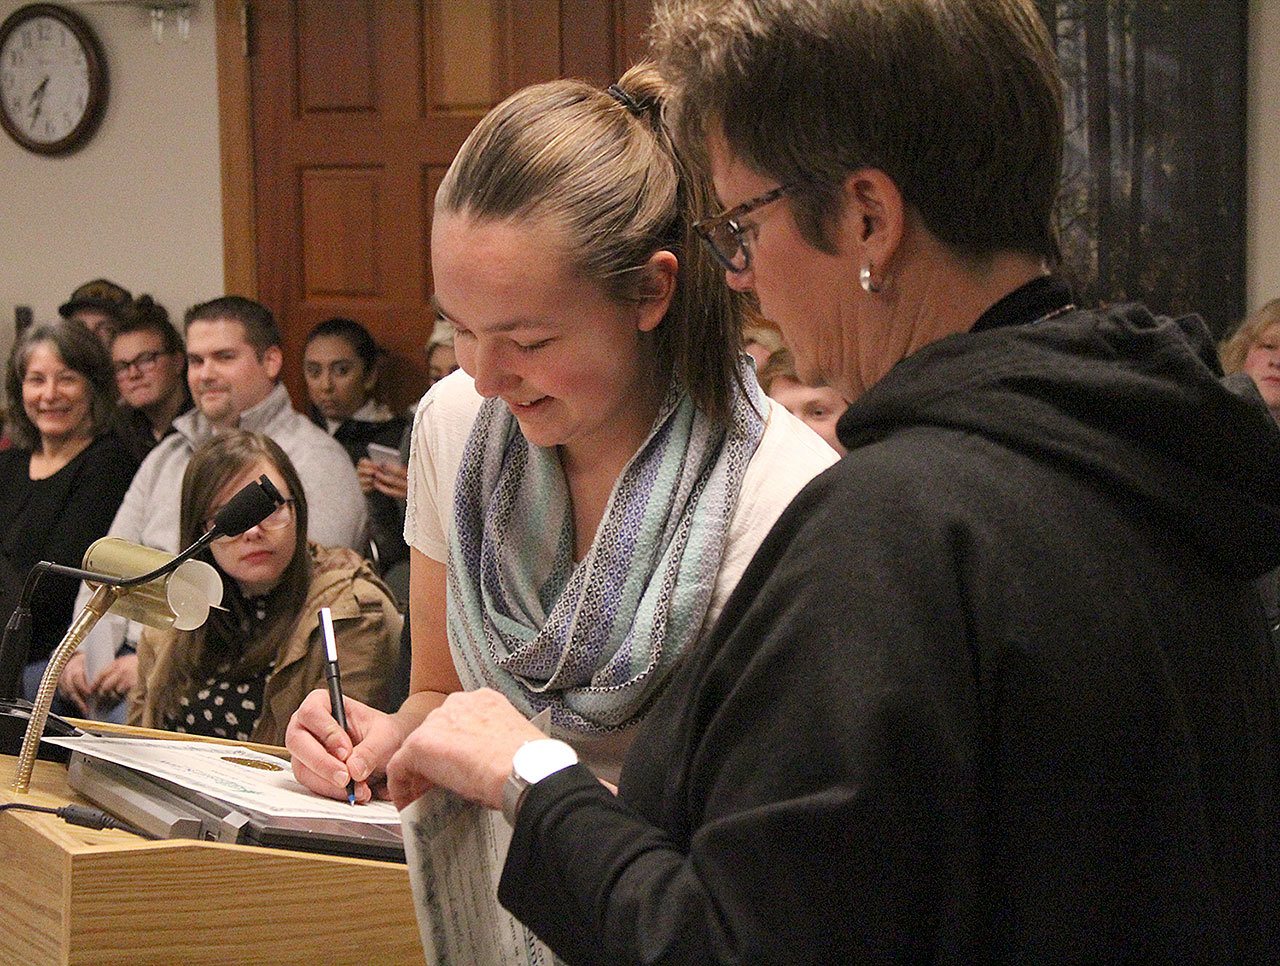 Audrey Crumb signing her certificate of service. Photo by Ray Still.